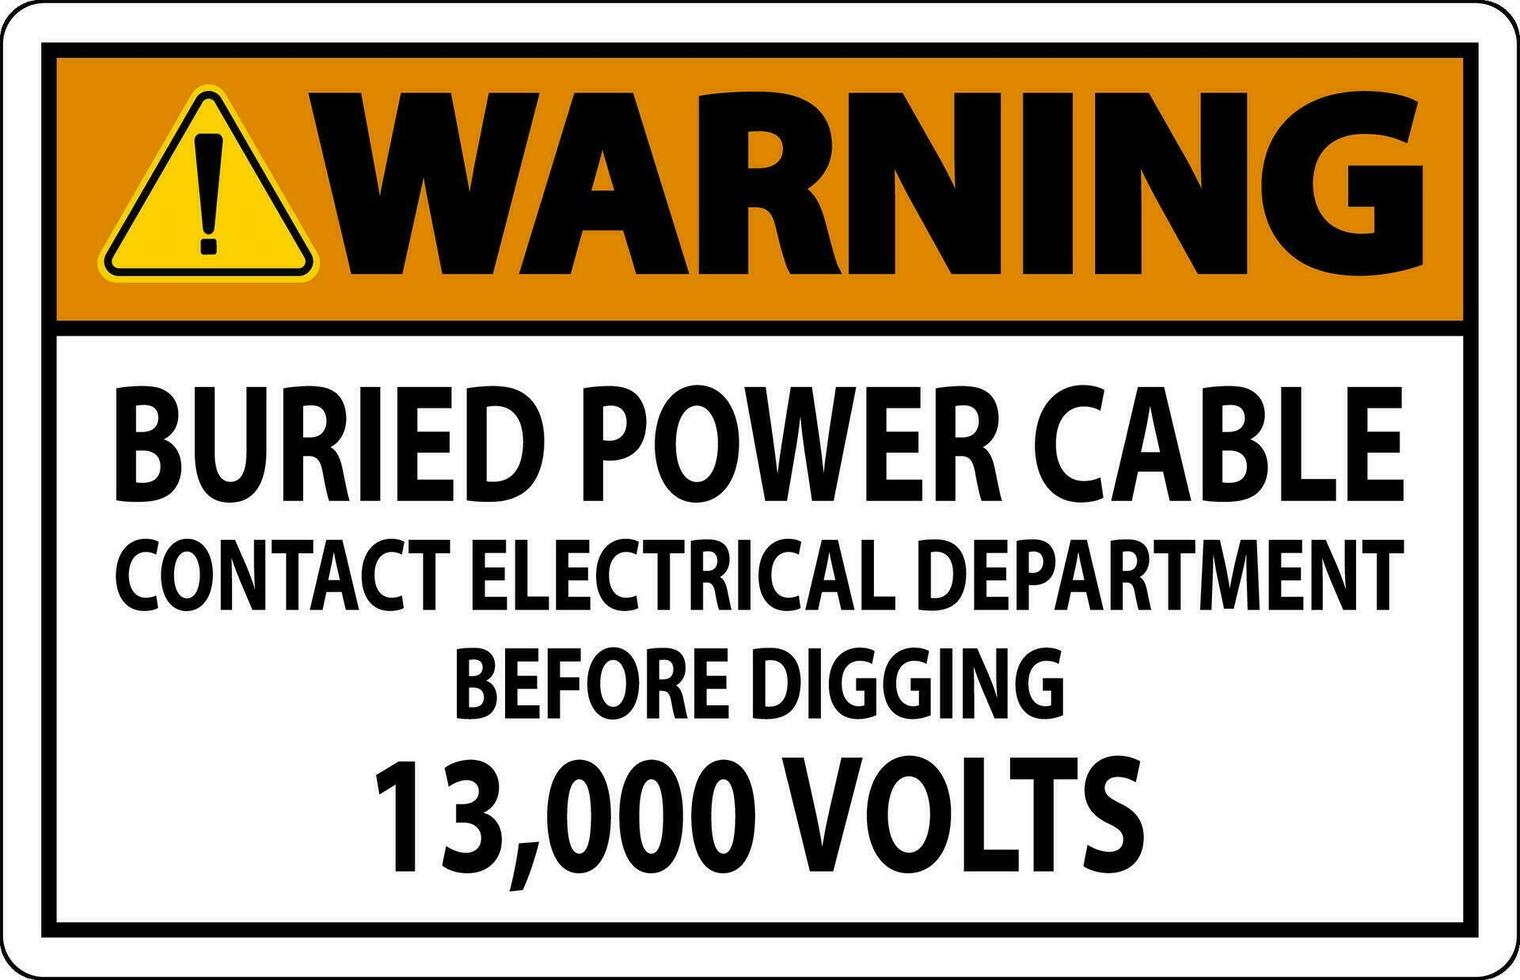 Warning Sign Buried Power Cable Contact Electrical Department Before Digging 13,000 Volts vector